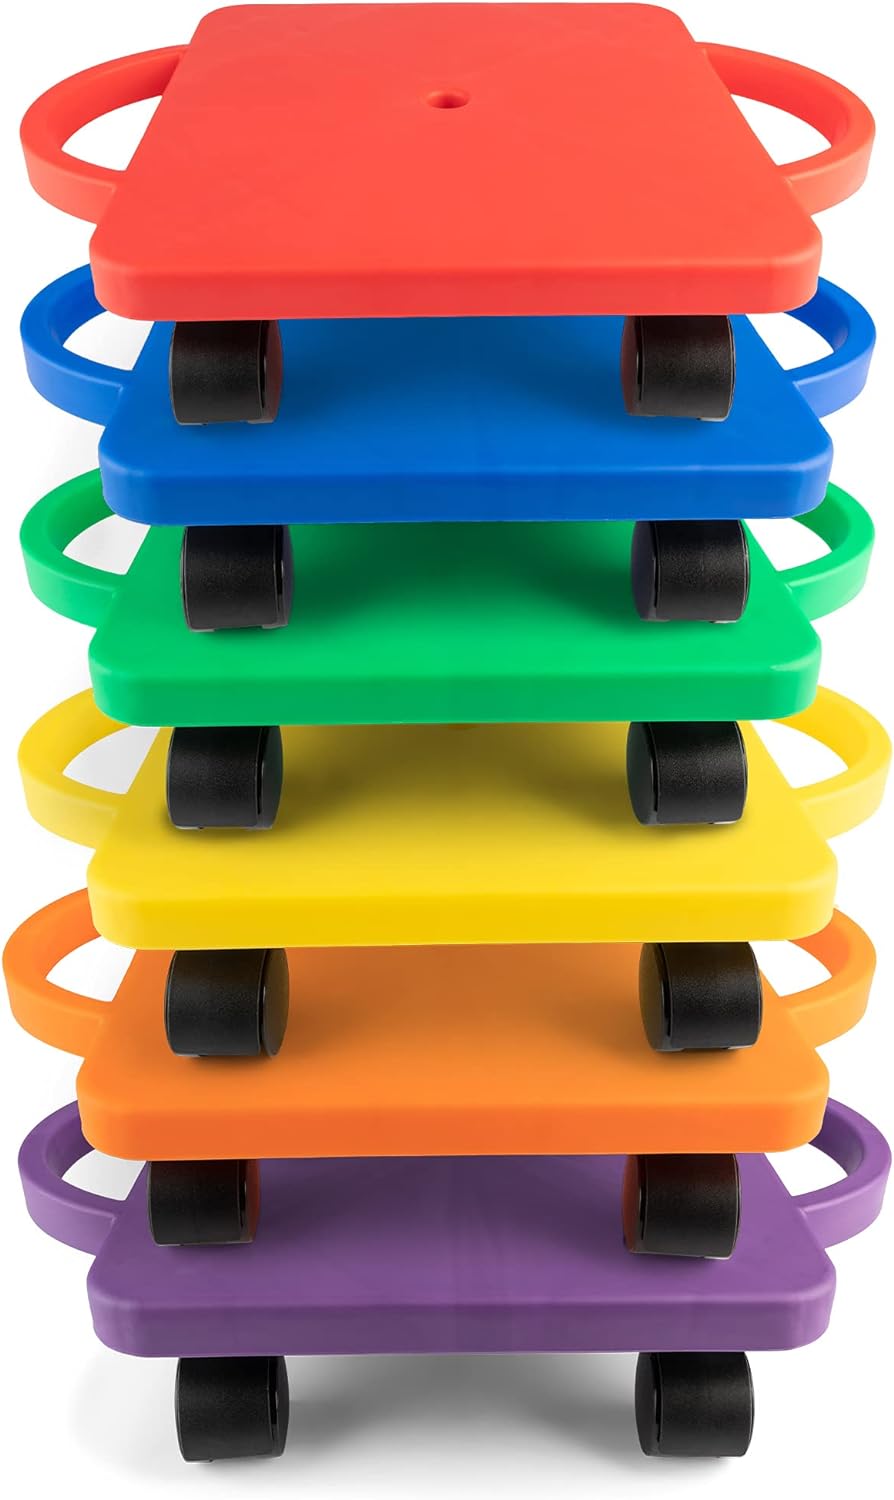 Champion Sports Scooter Board with Handles, Set of 6, Wide 12 x 12 Base - Multi-Colored, Fun Sports Scooters with Non-Marring Plastic Casters for Children - Premium Kids Outdoor Activities and Toys